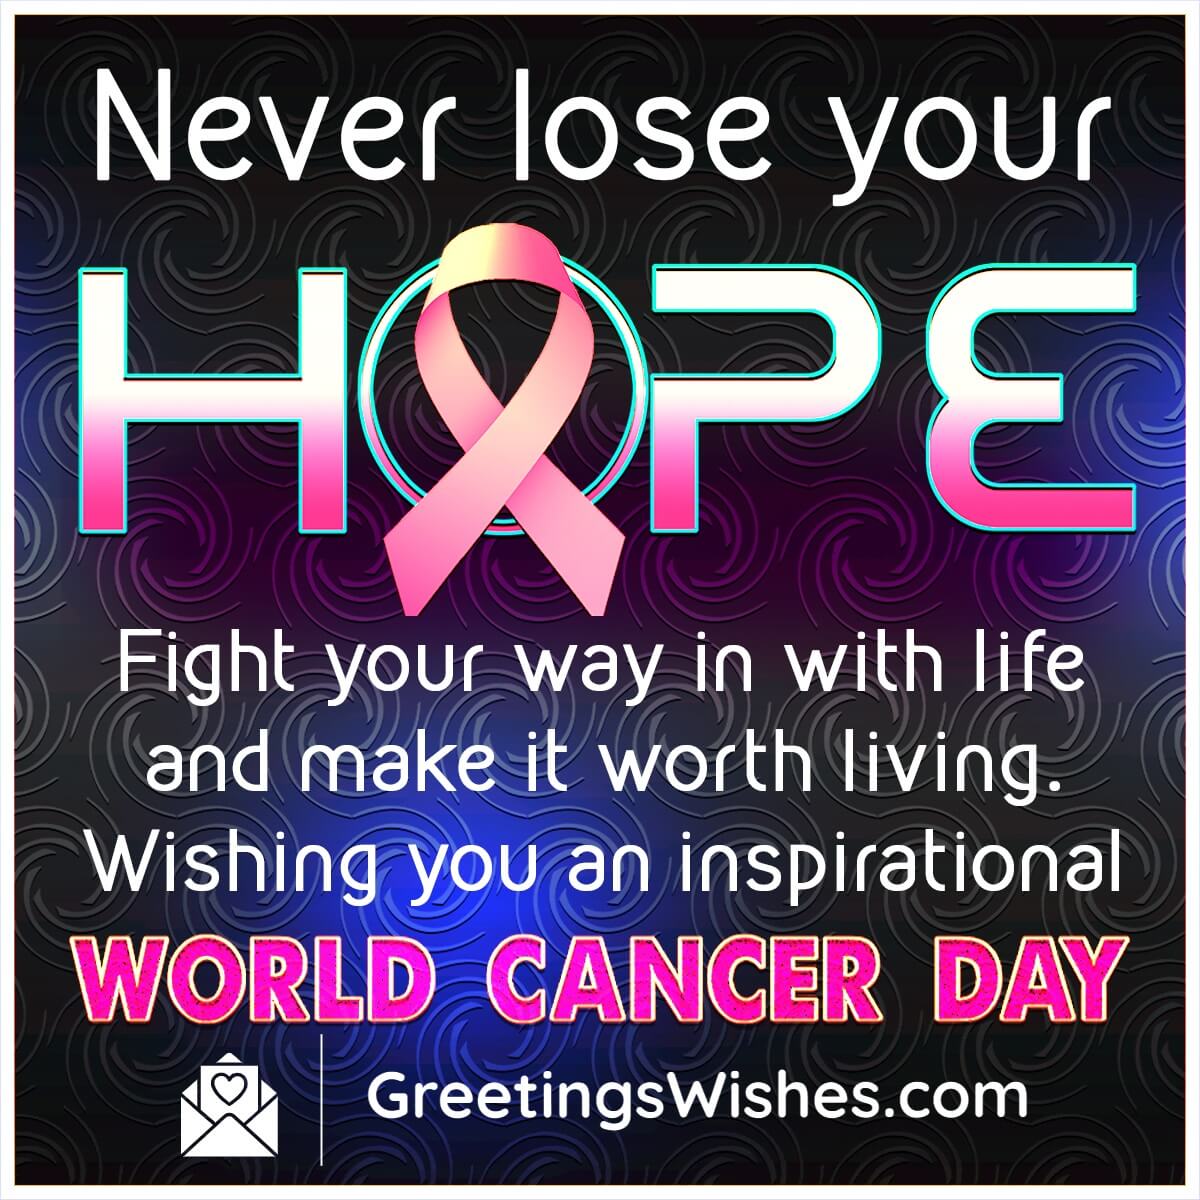 World Cancer Day Inspirational Message